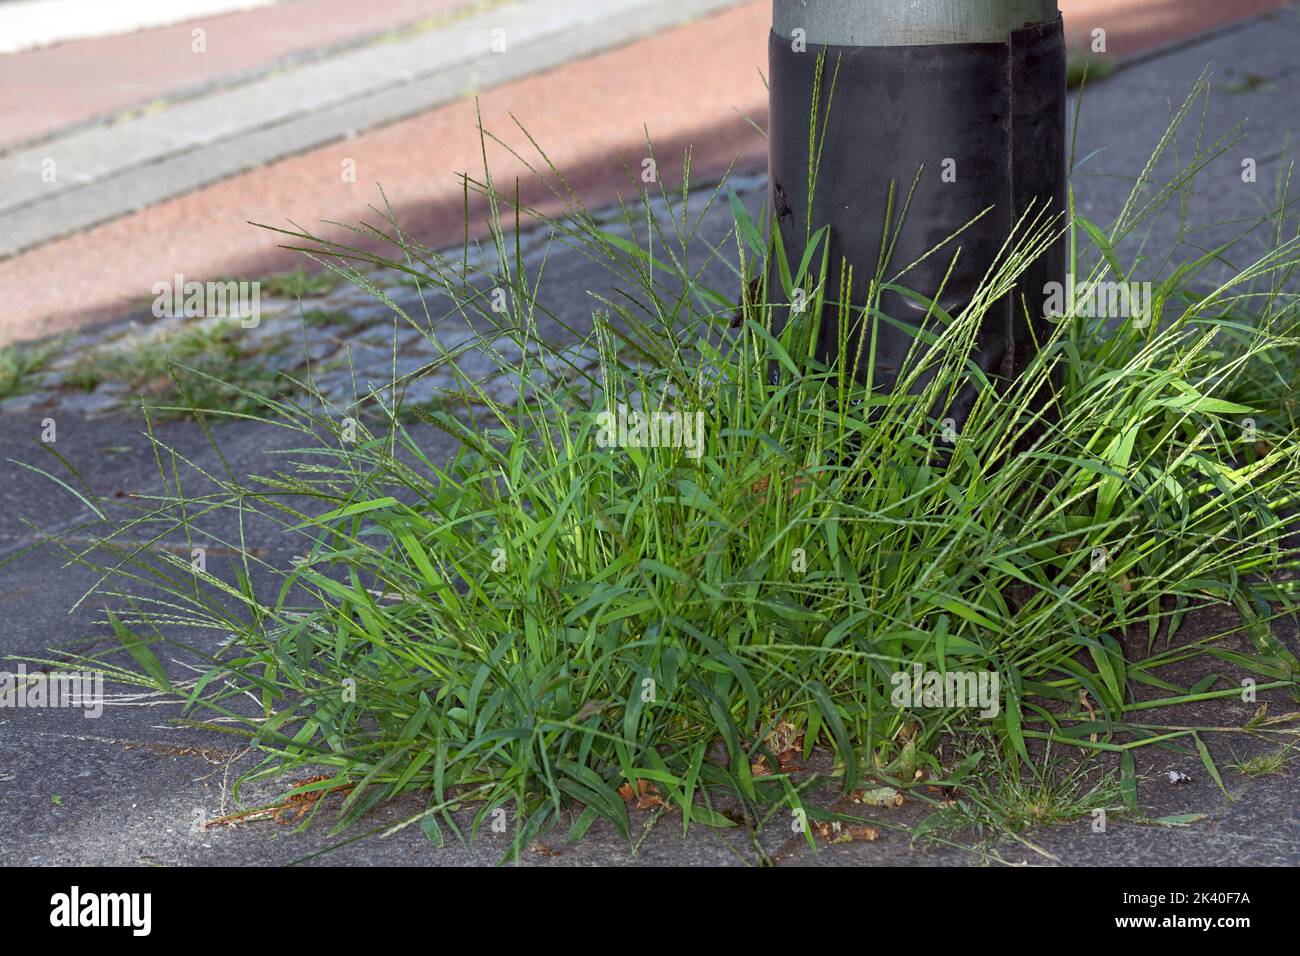 hairy finger-grass, large crabgrass (Digitaria sanguinalis), on a pavement, Germany Stock Photo